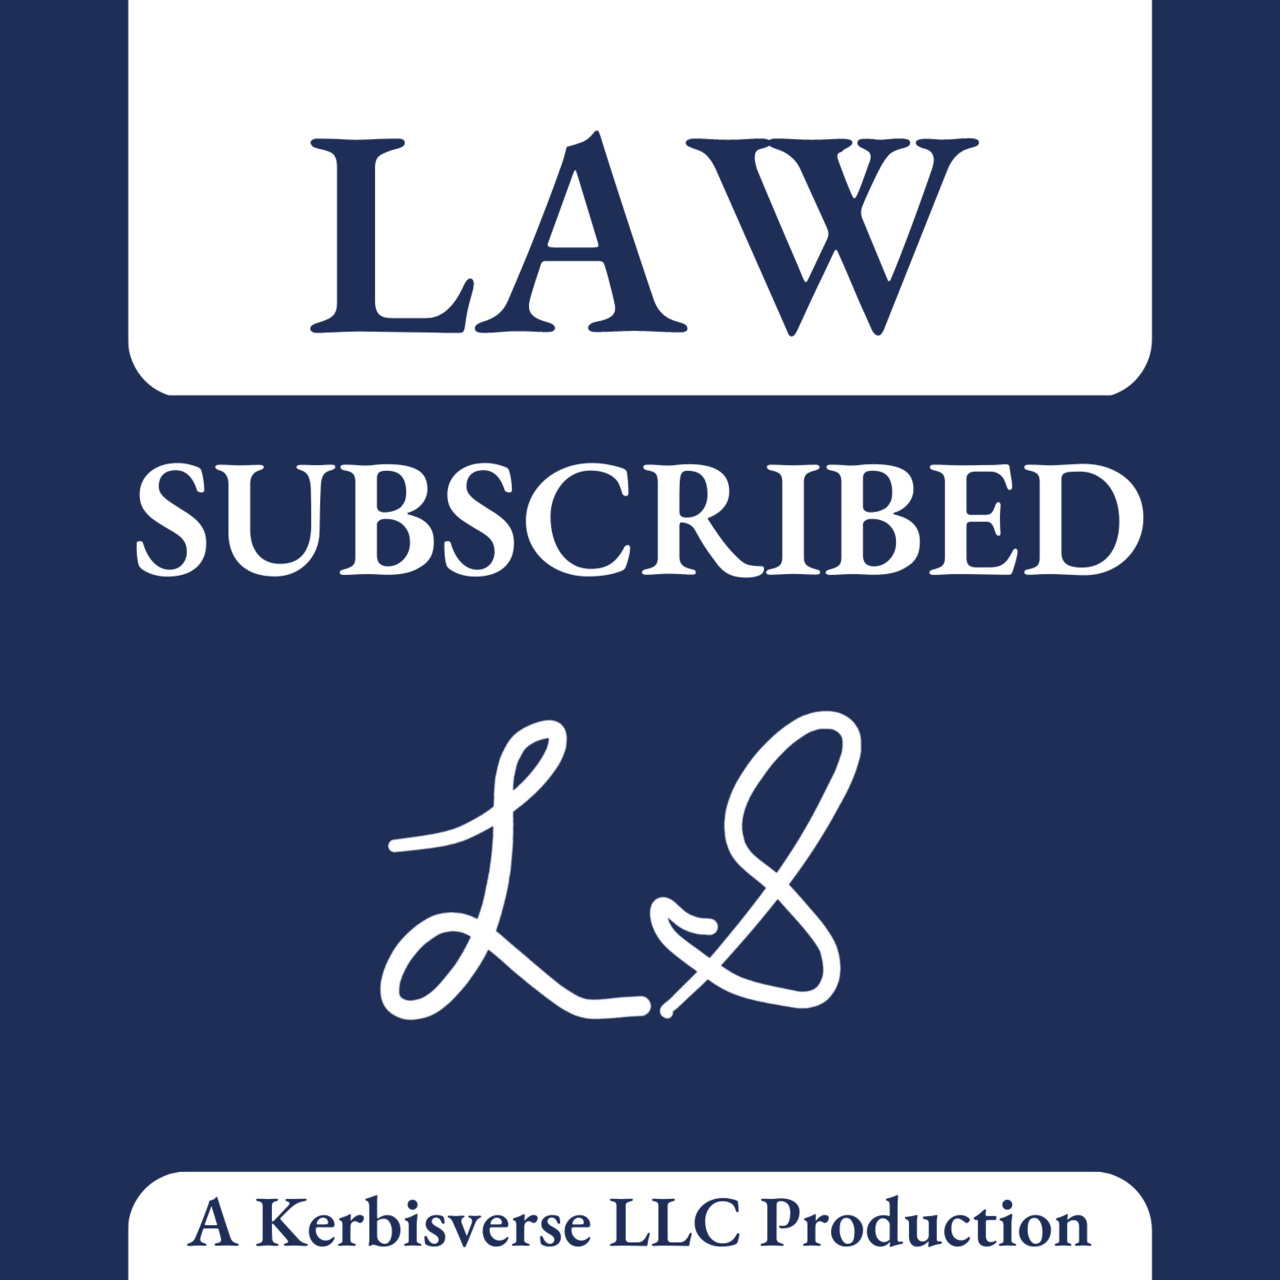 (62) Subscriptions Make Law Good with Liam Moriarty of Lawgood